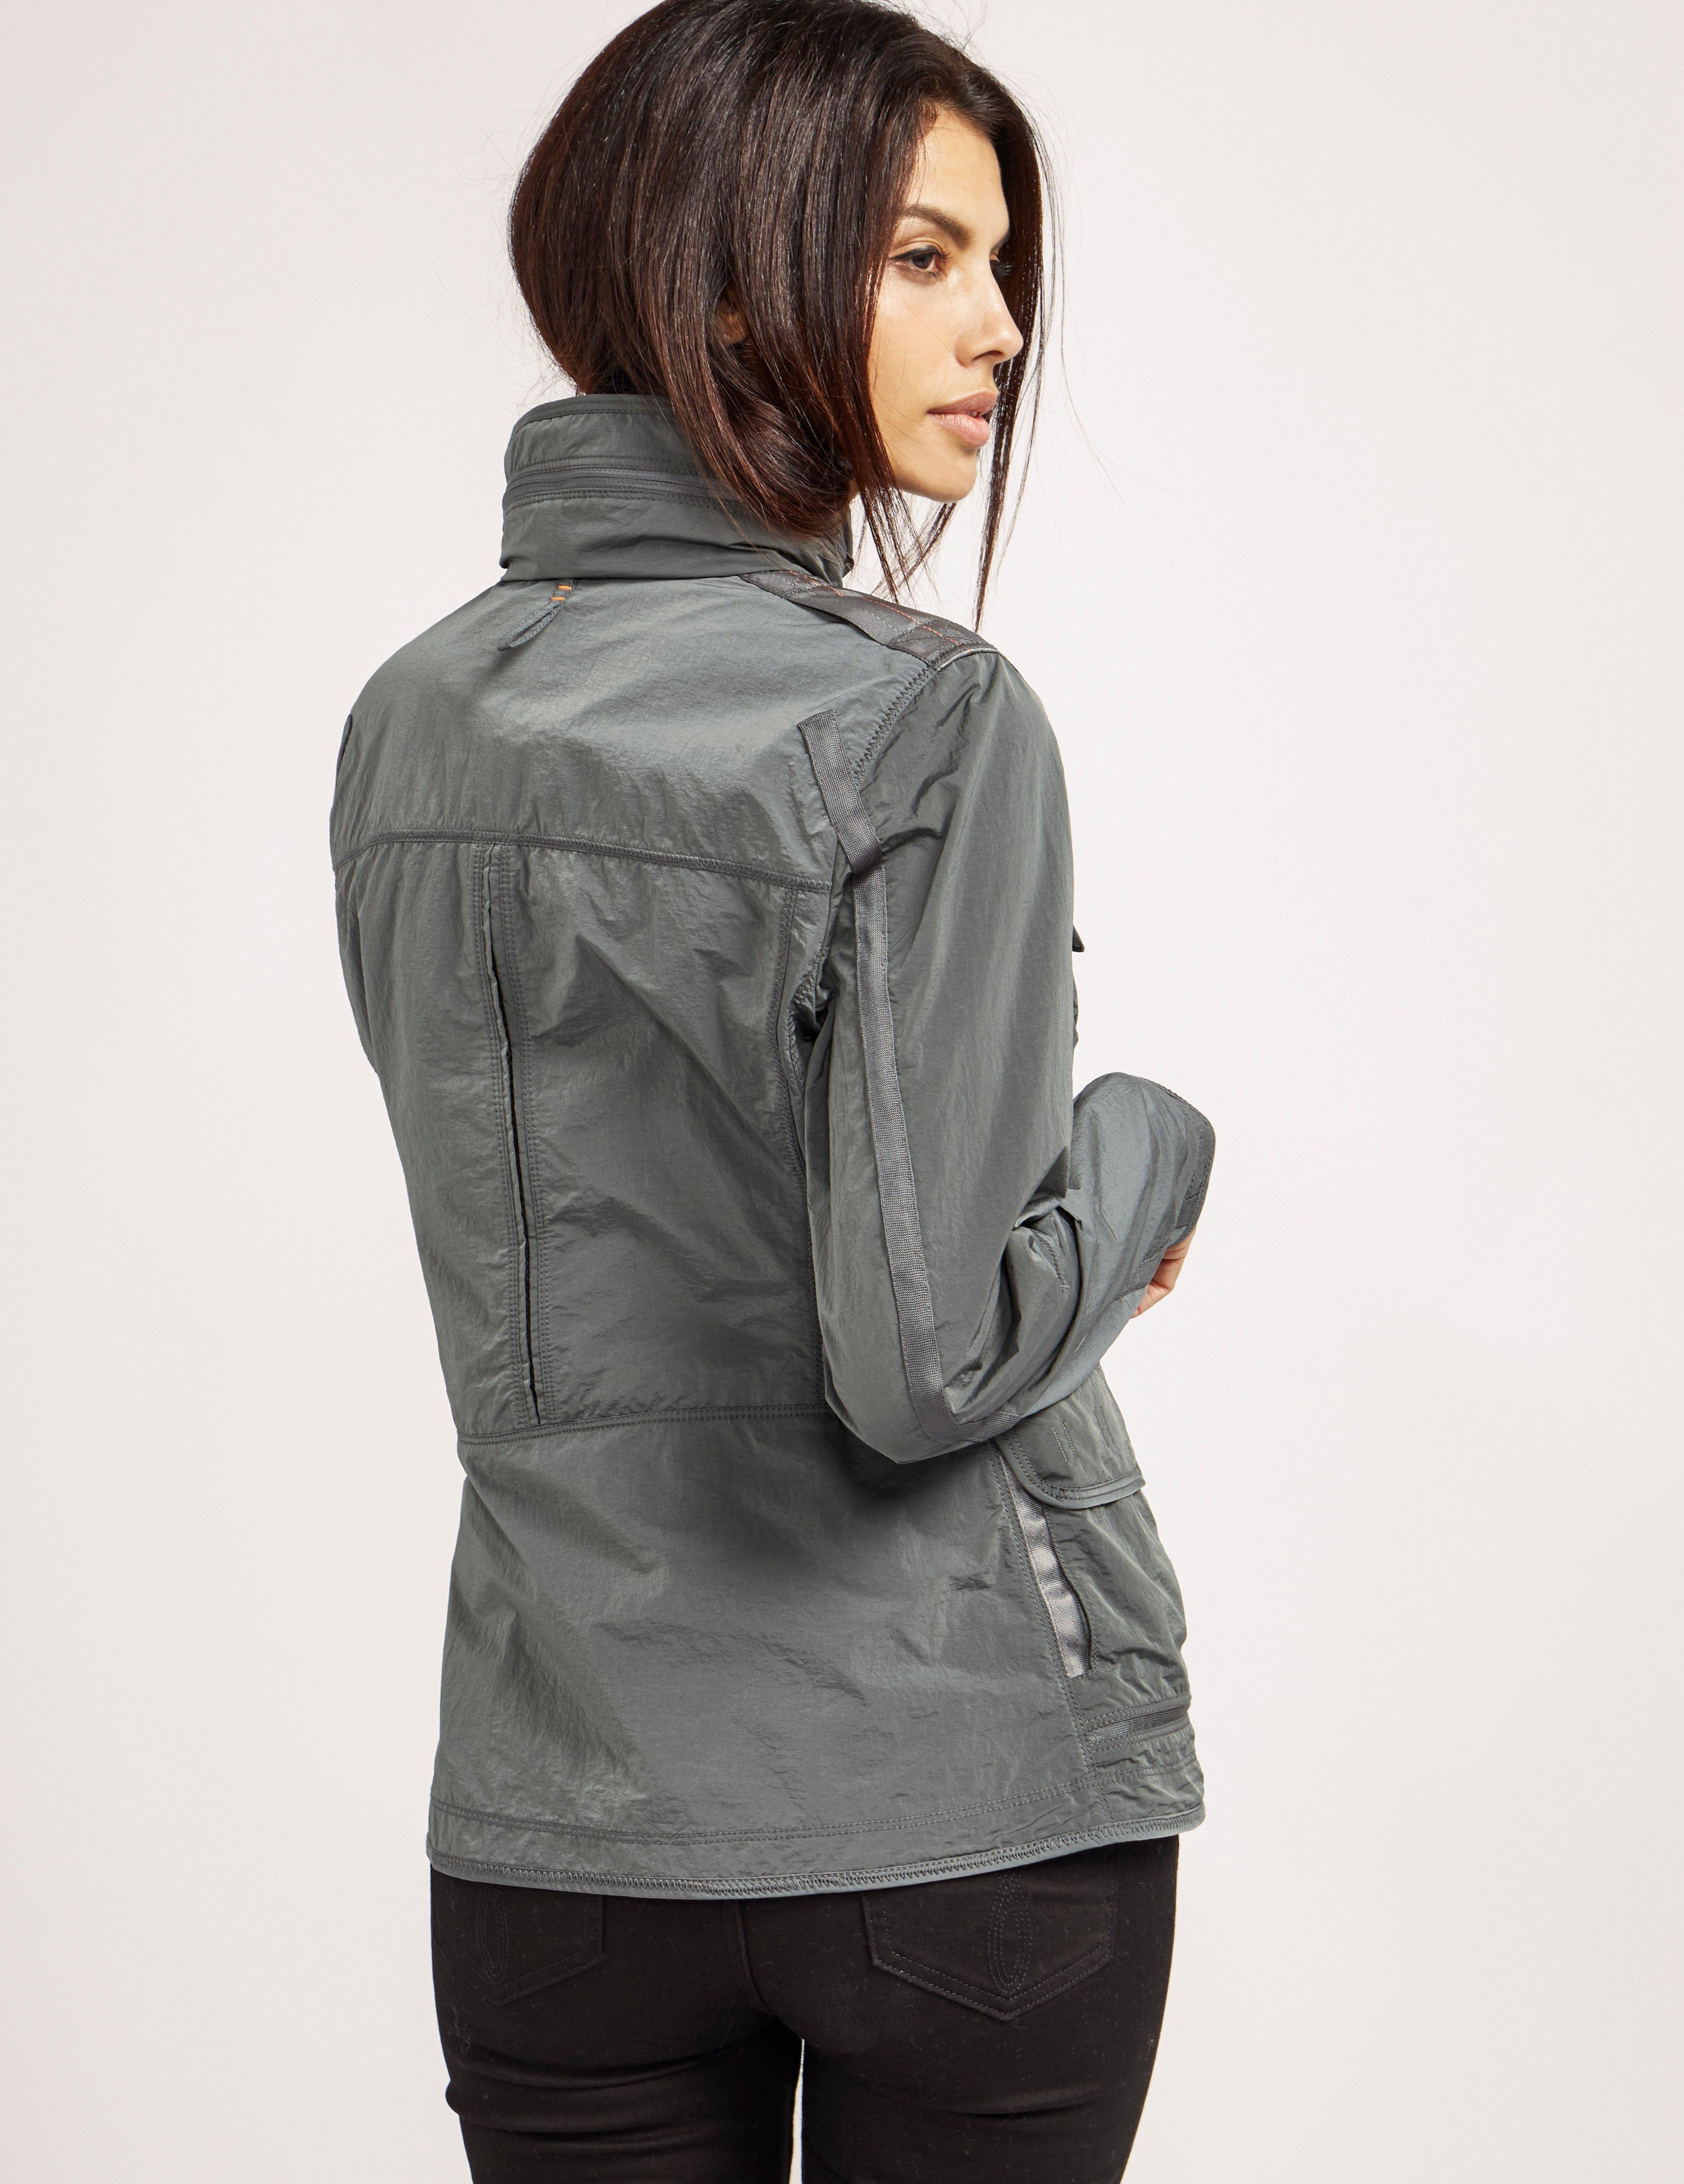 Parajumpers Desert Jacket in Charcoal (Gray) - Lyst